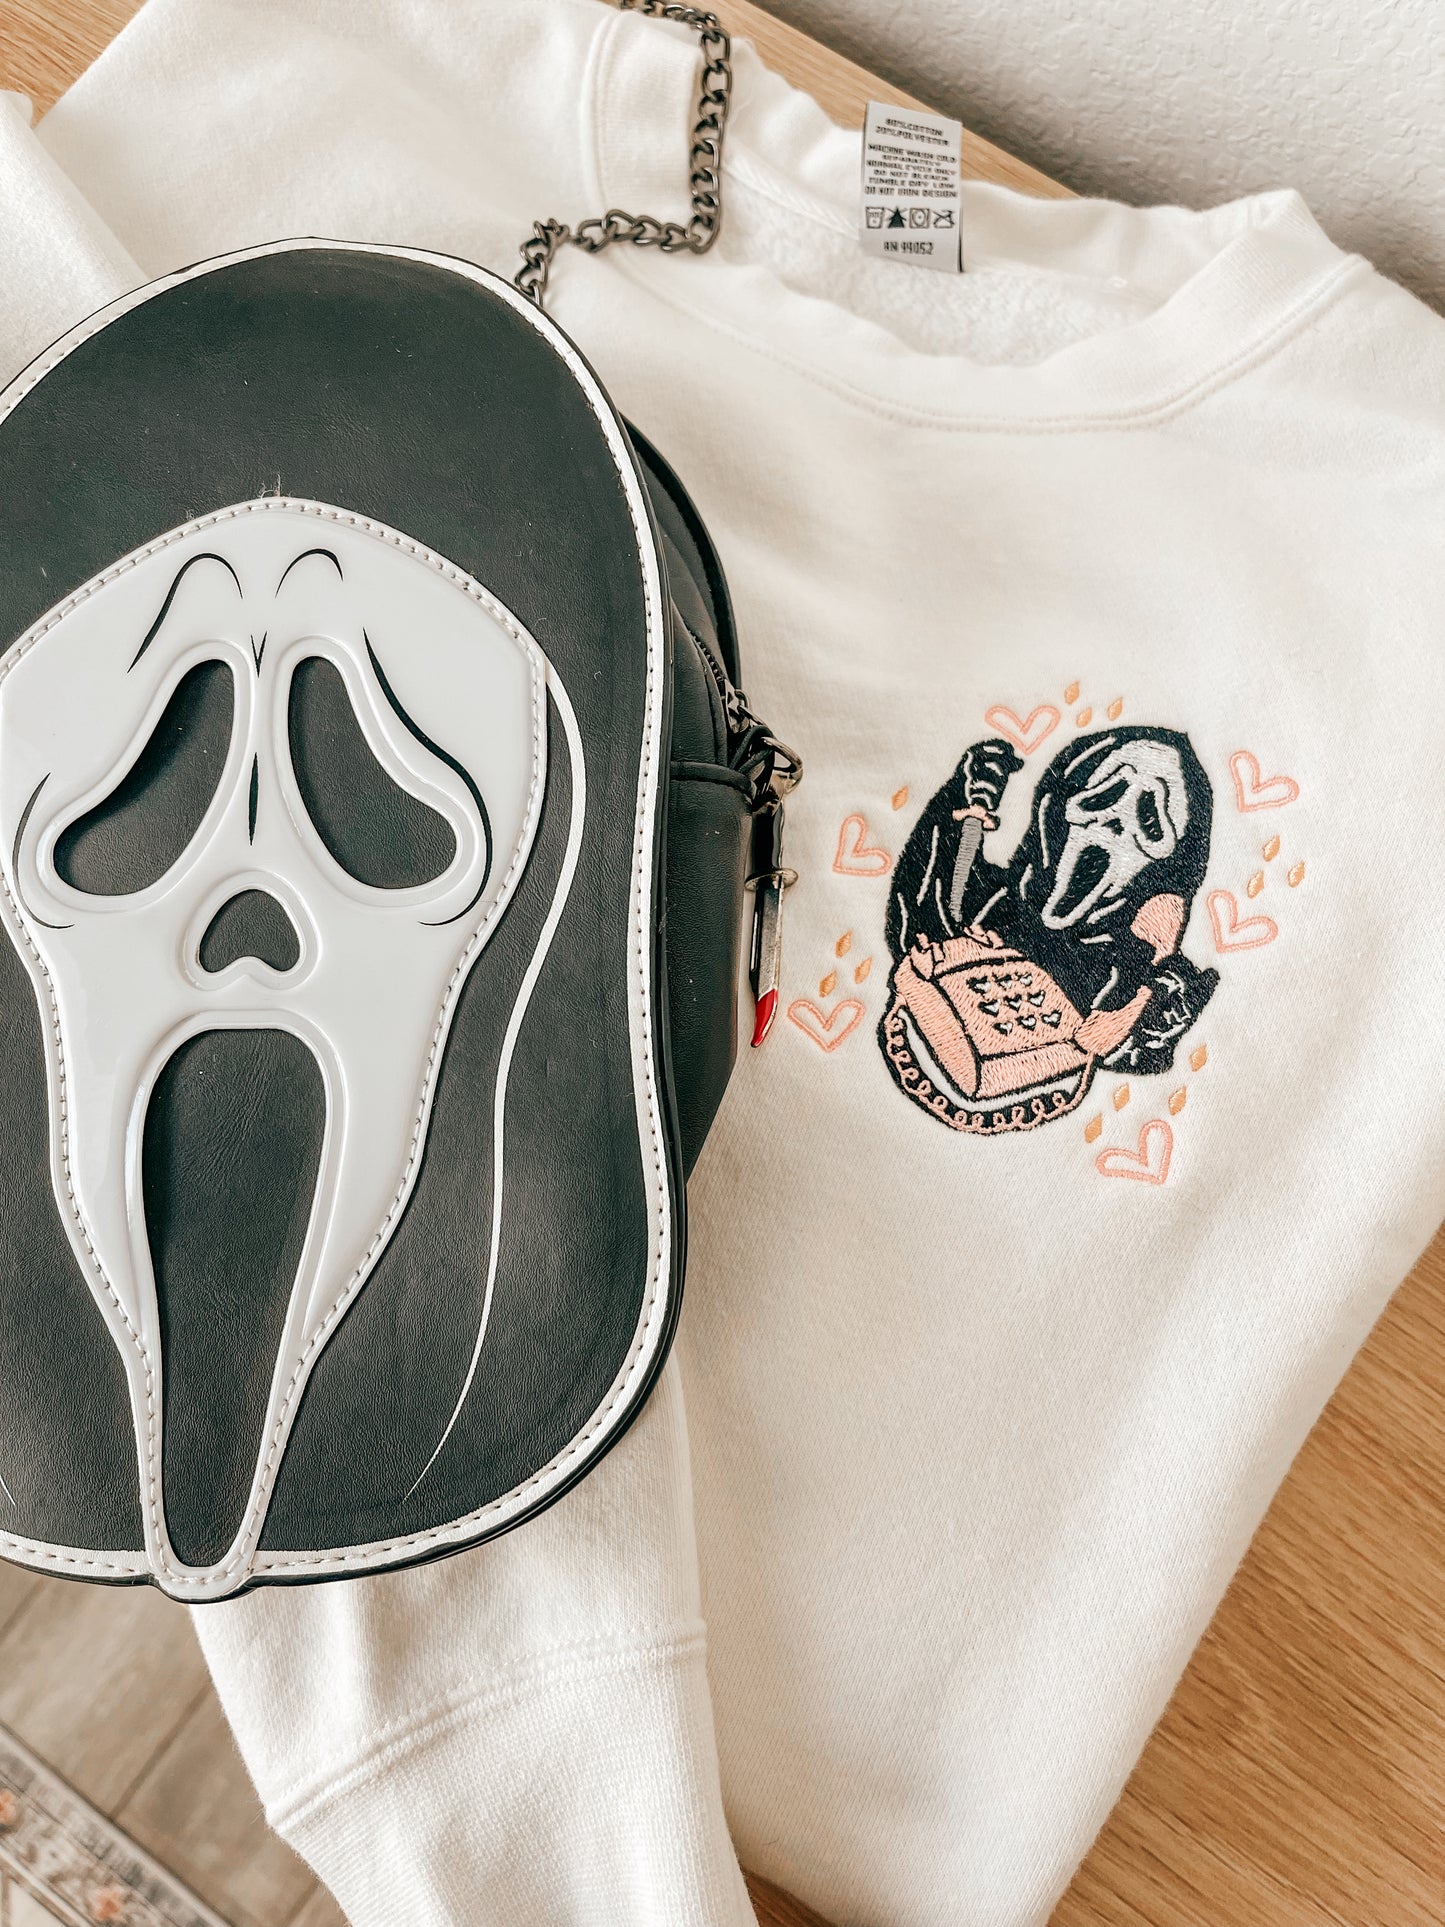 Scream Ghost Face - Embroidered Sweatshirt (Creme)